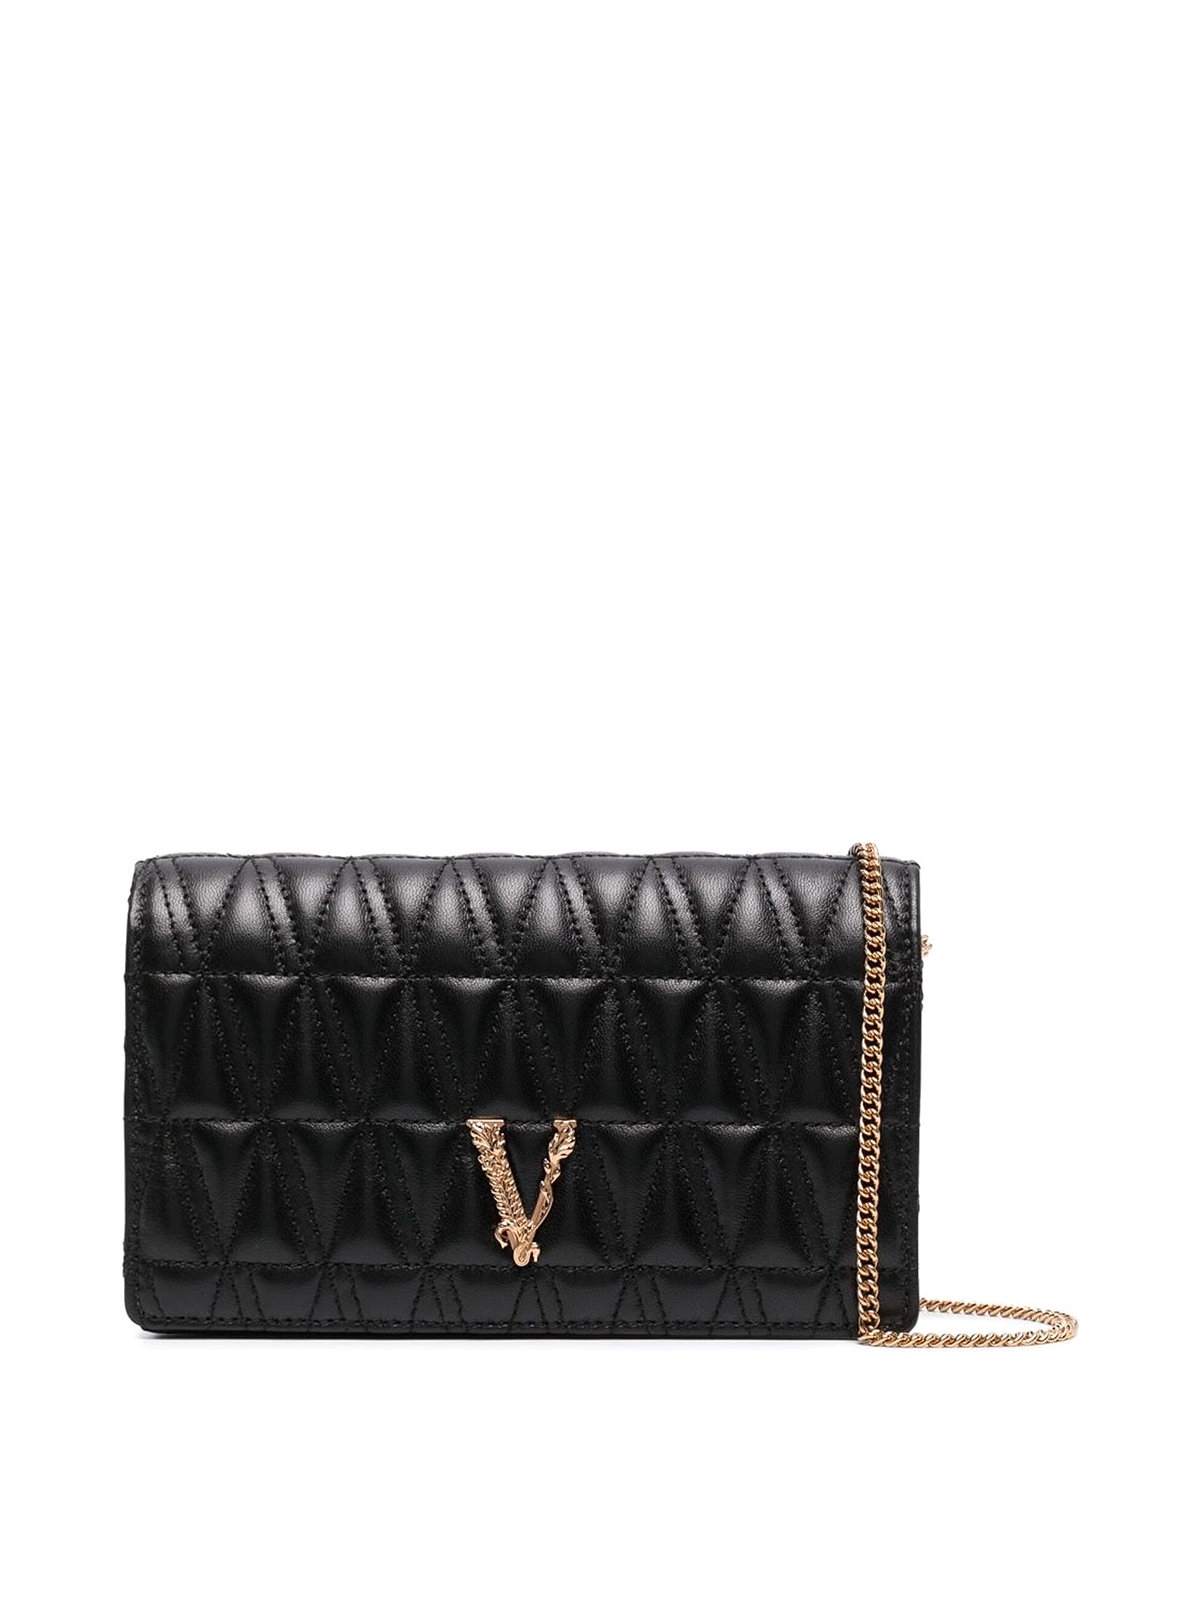 Versace Virtus Quilted Leather Mini Bag In Black